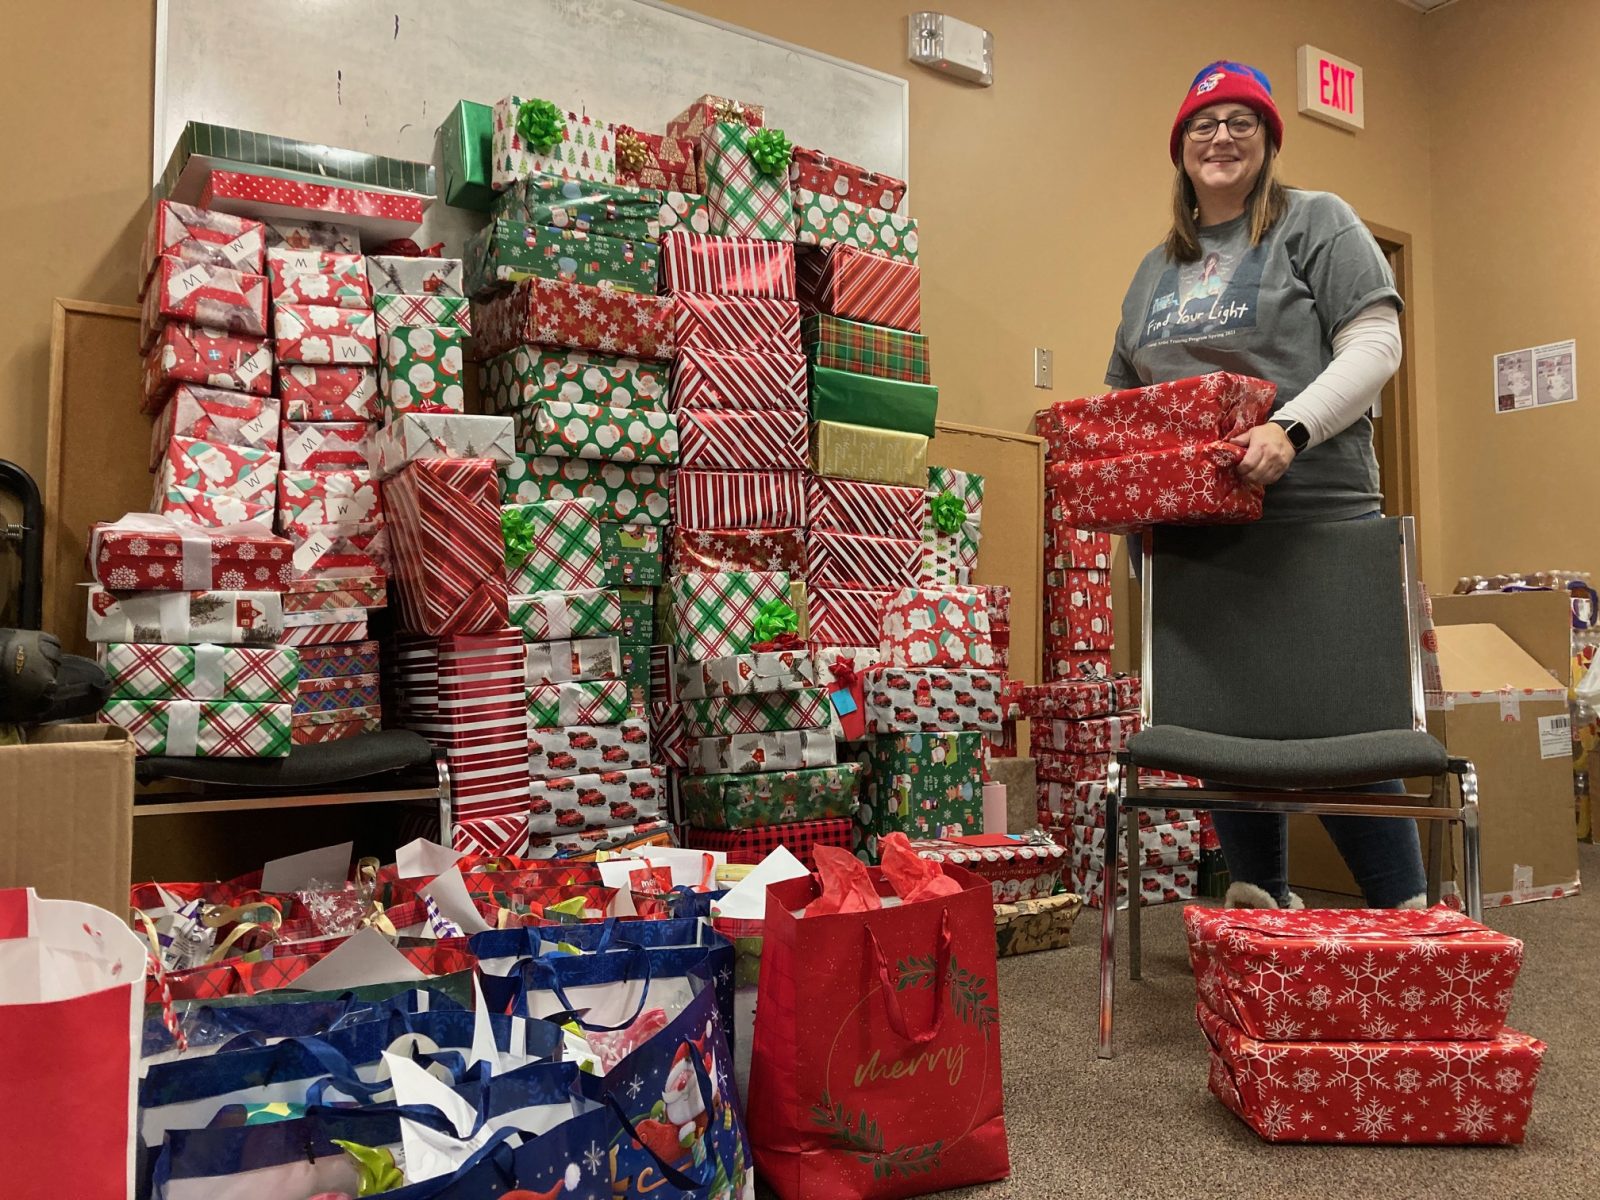 Homeless advocate and volunteer Katrin Scott stands with more than 200 wrapped gifts she plans to deliver to the cold weather shelters on Christmas Eve.